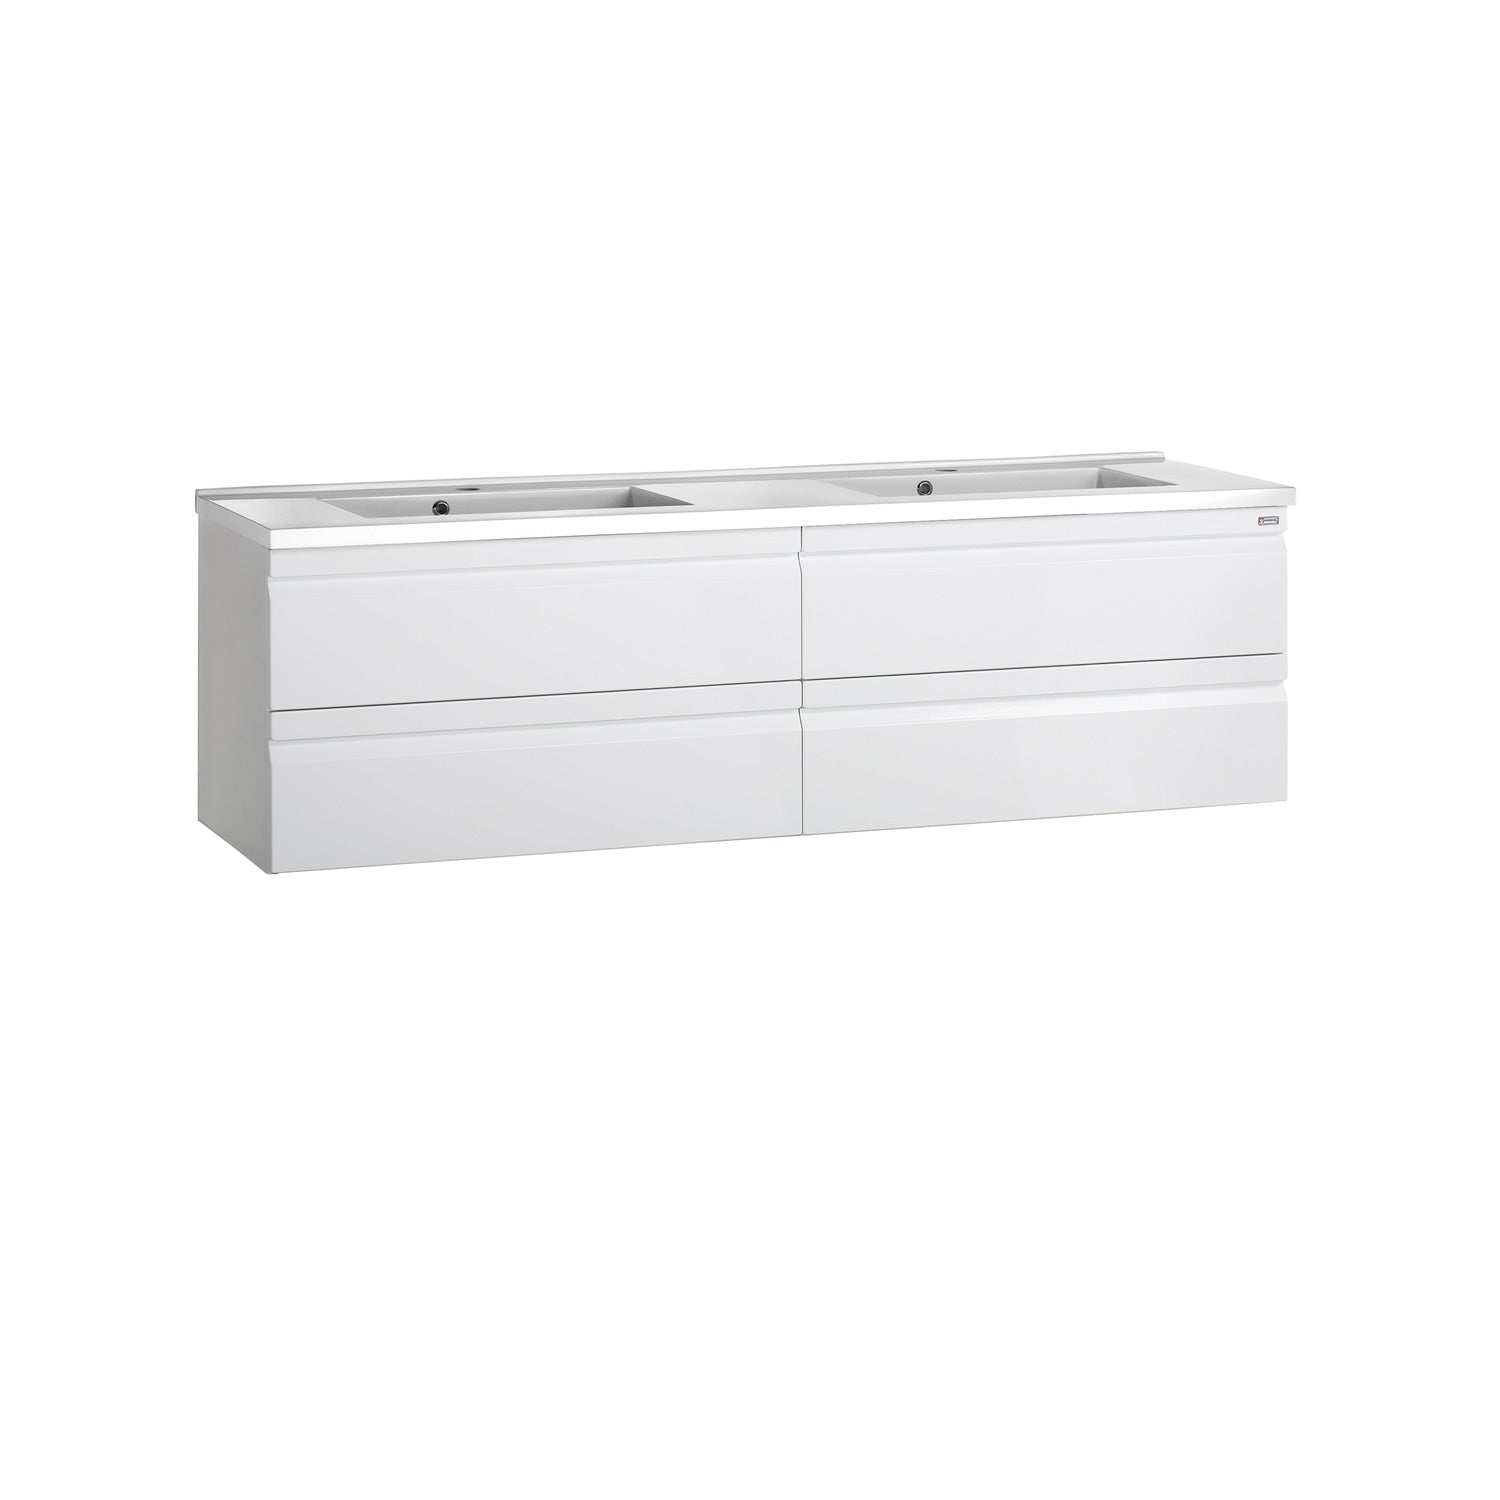 56" Double Vanity, Wall Mount, 4 Drawers with Soft Close, White, Serie Solco by VALENZUELA